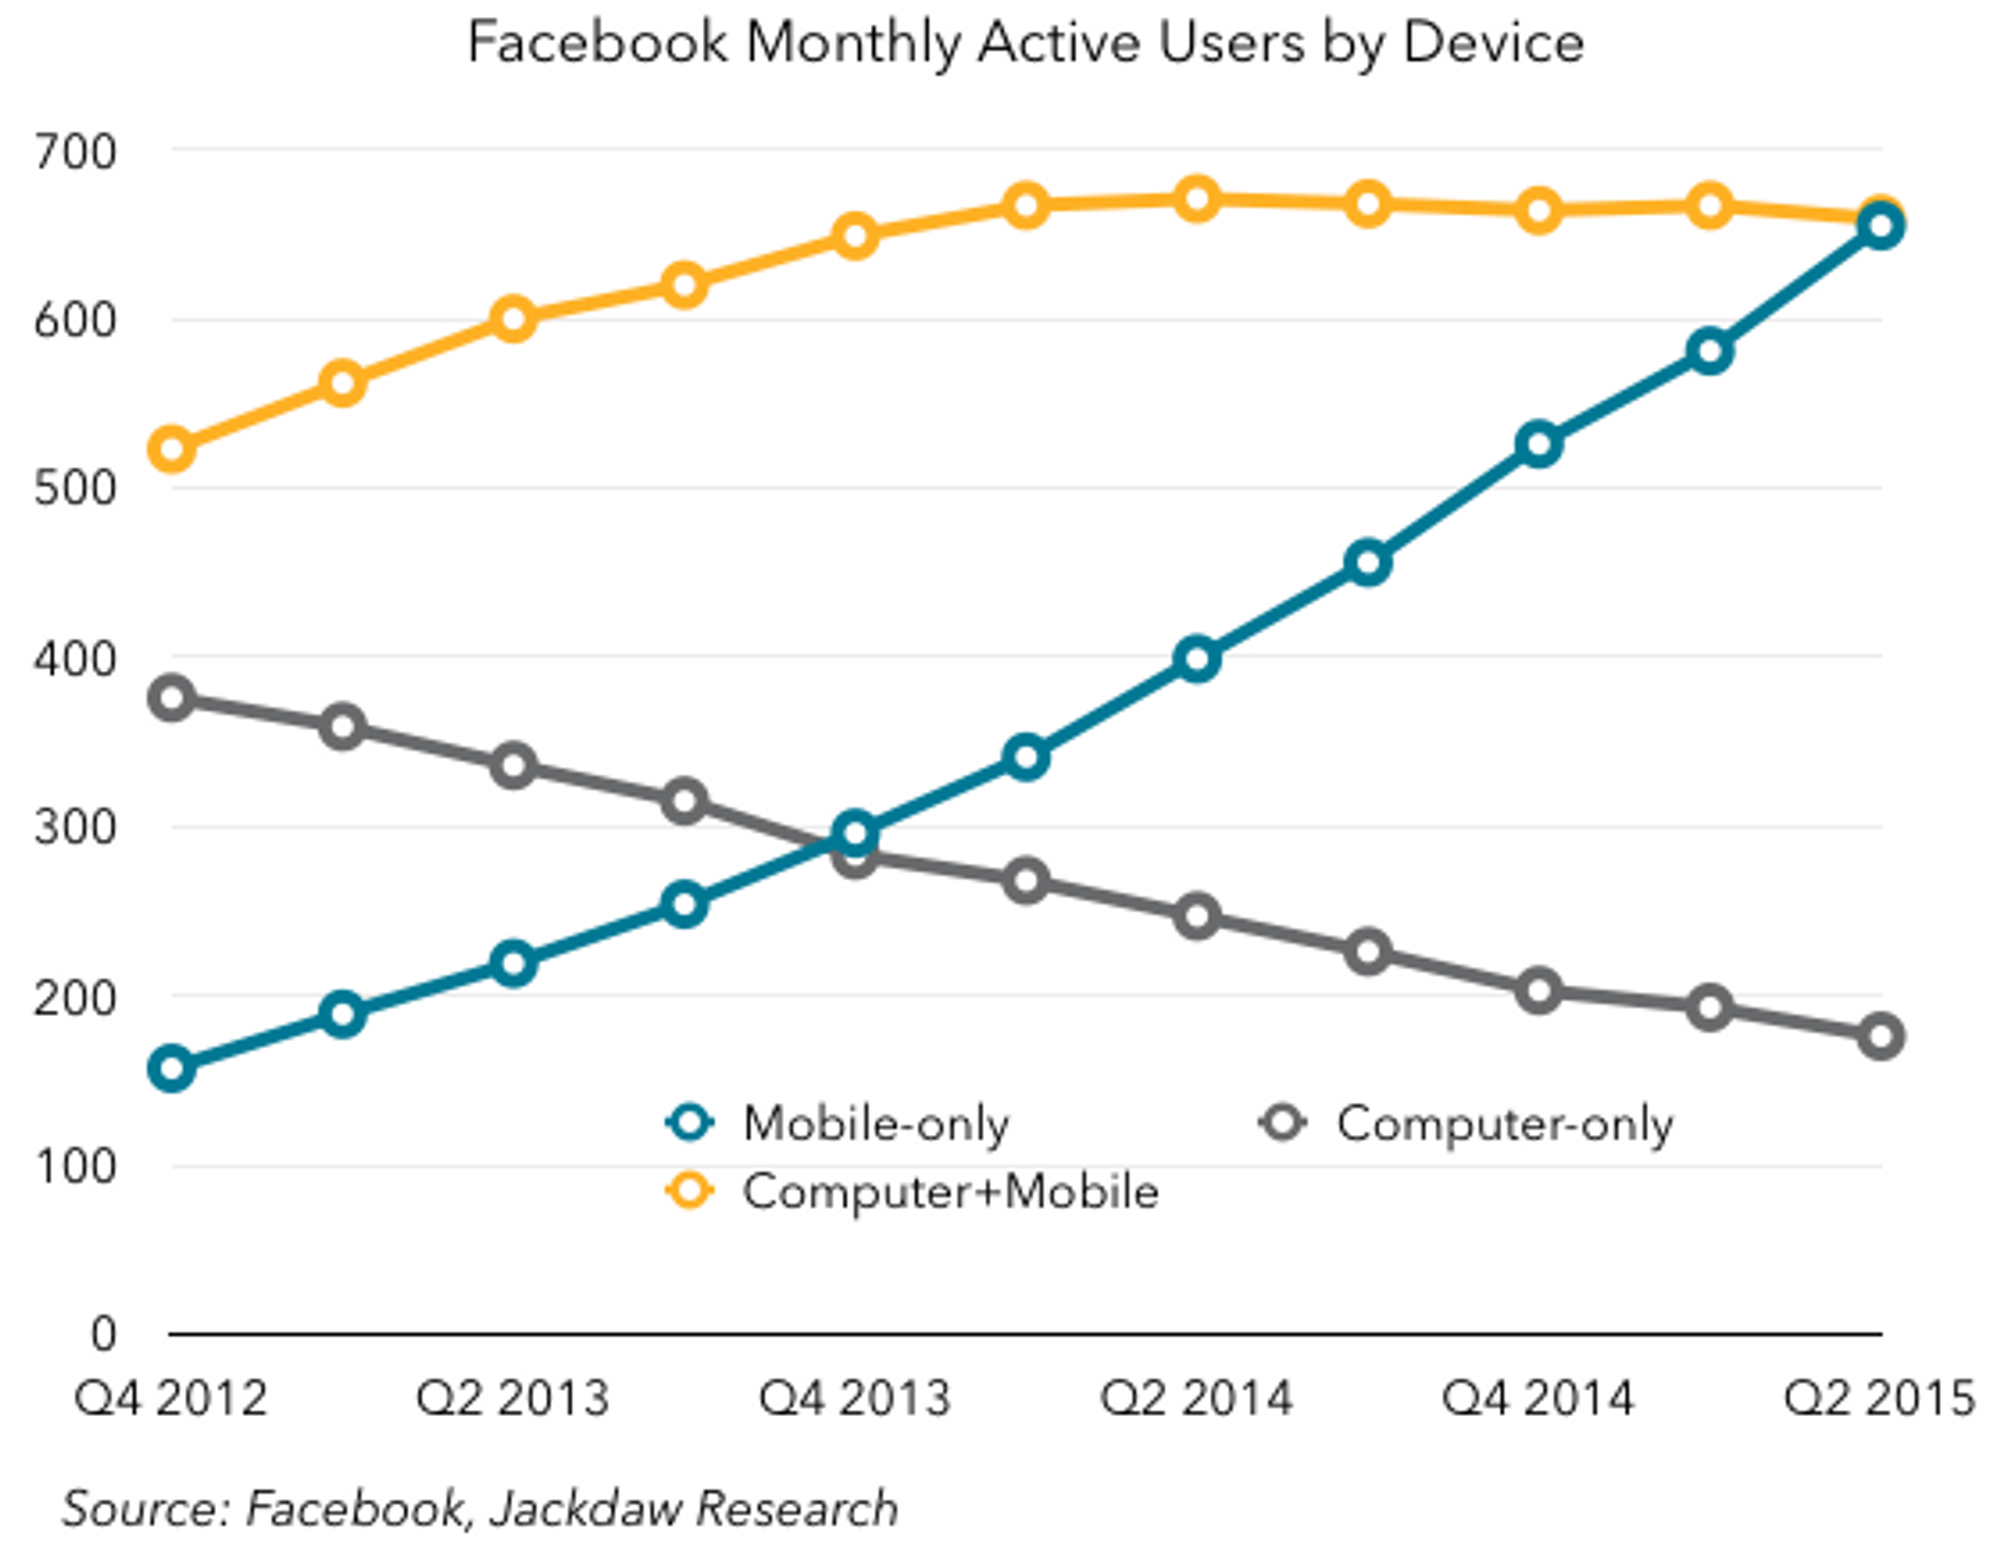 Thoughts On Facebook's Q2 2015 Earnings https://www.beyonddevic.es/2015/07/